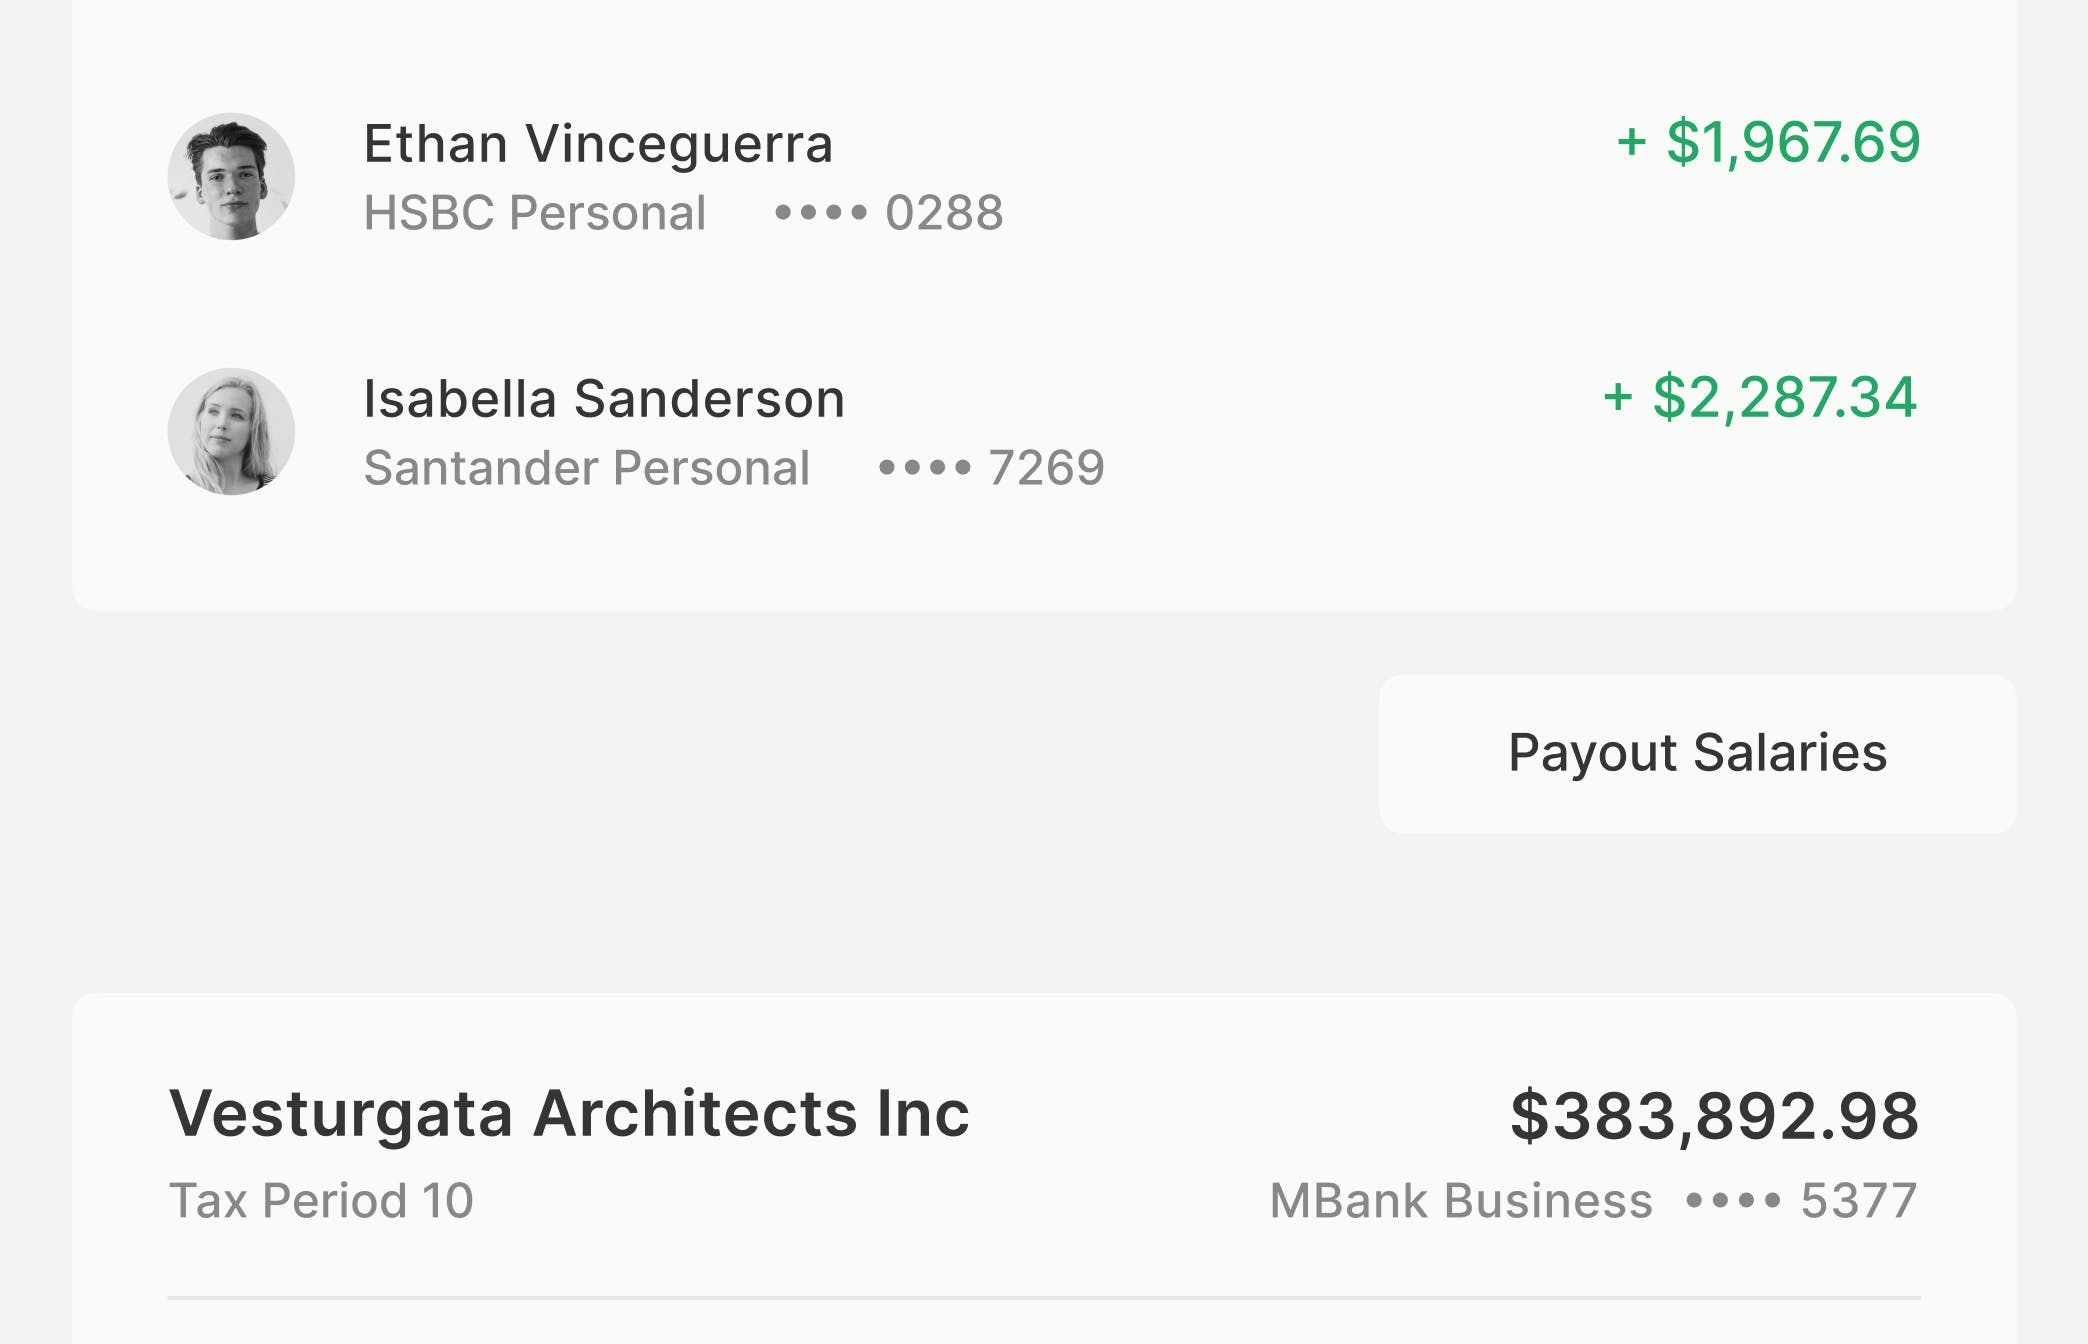 Grouped payouts for architecture firm